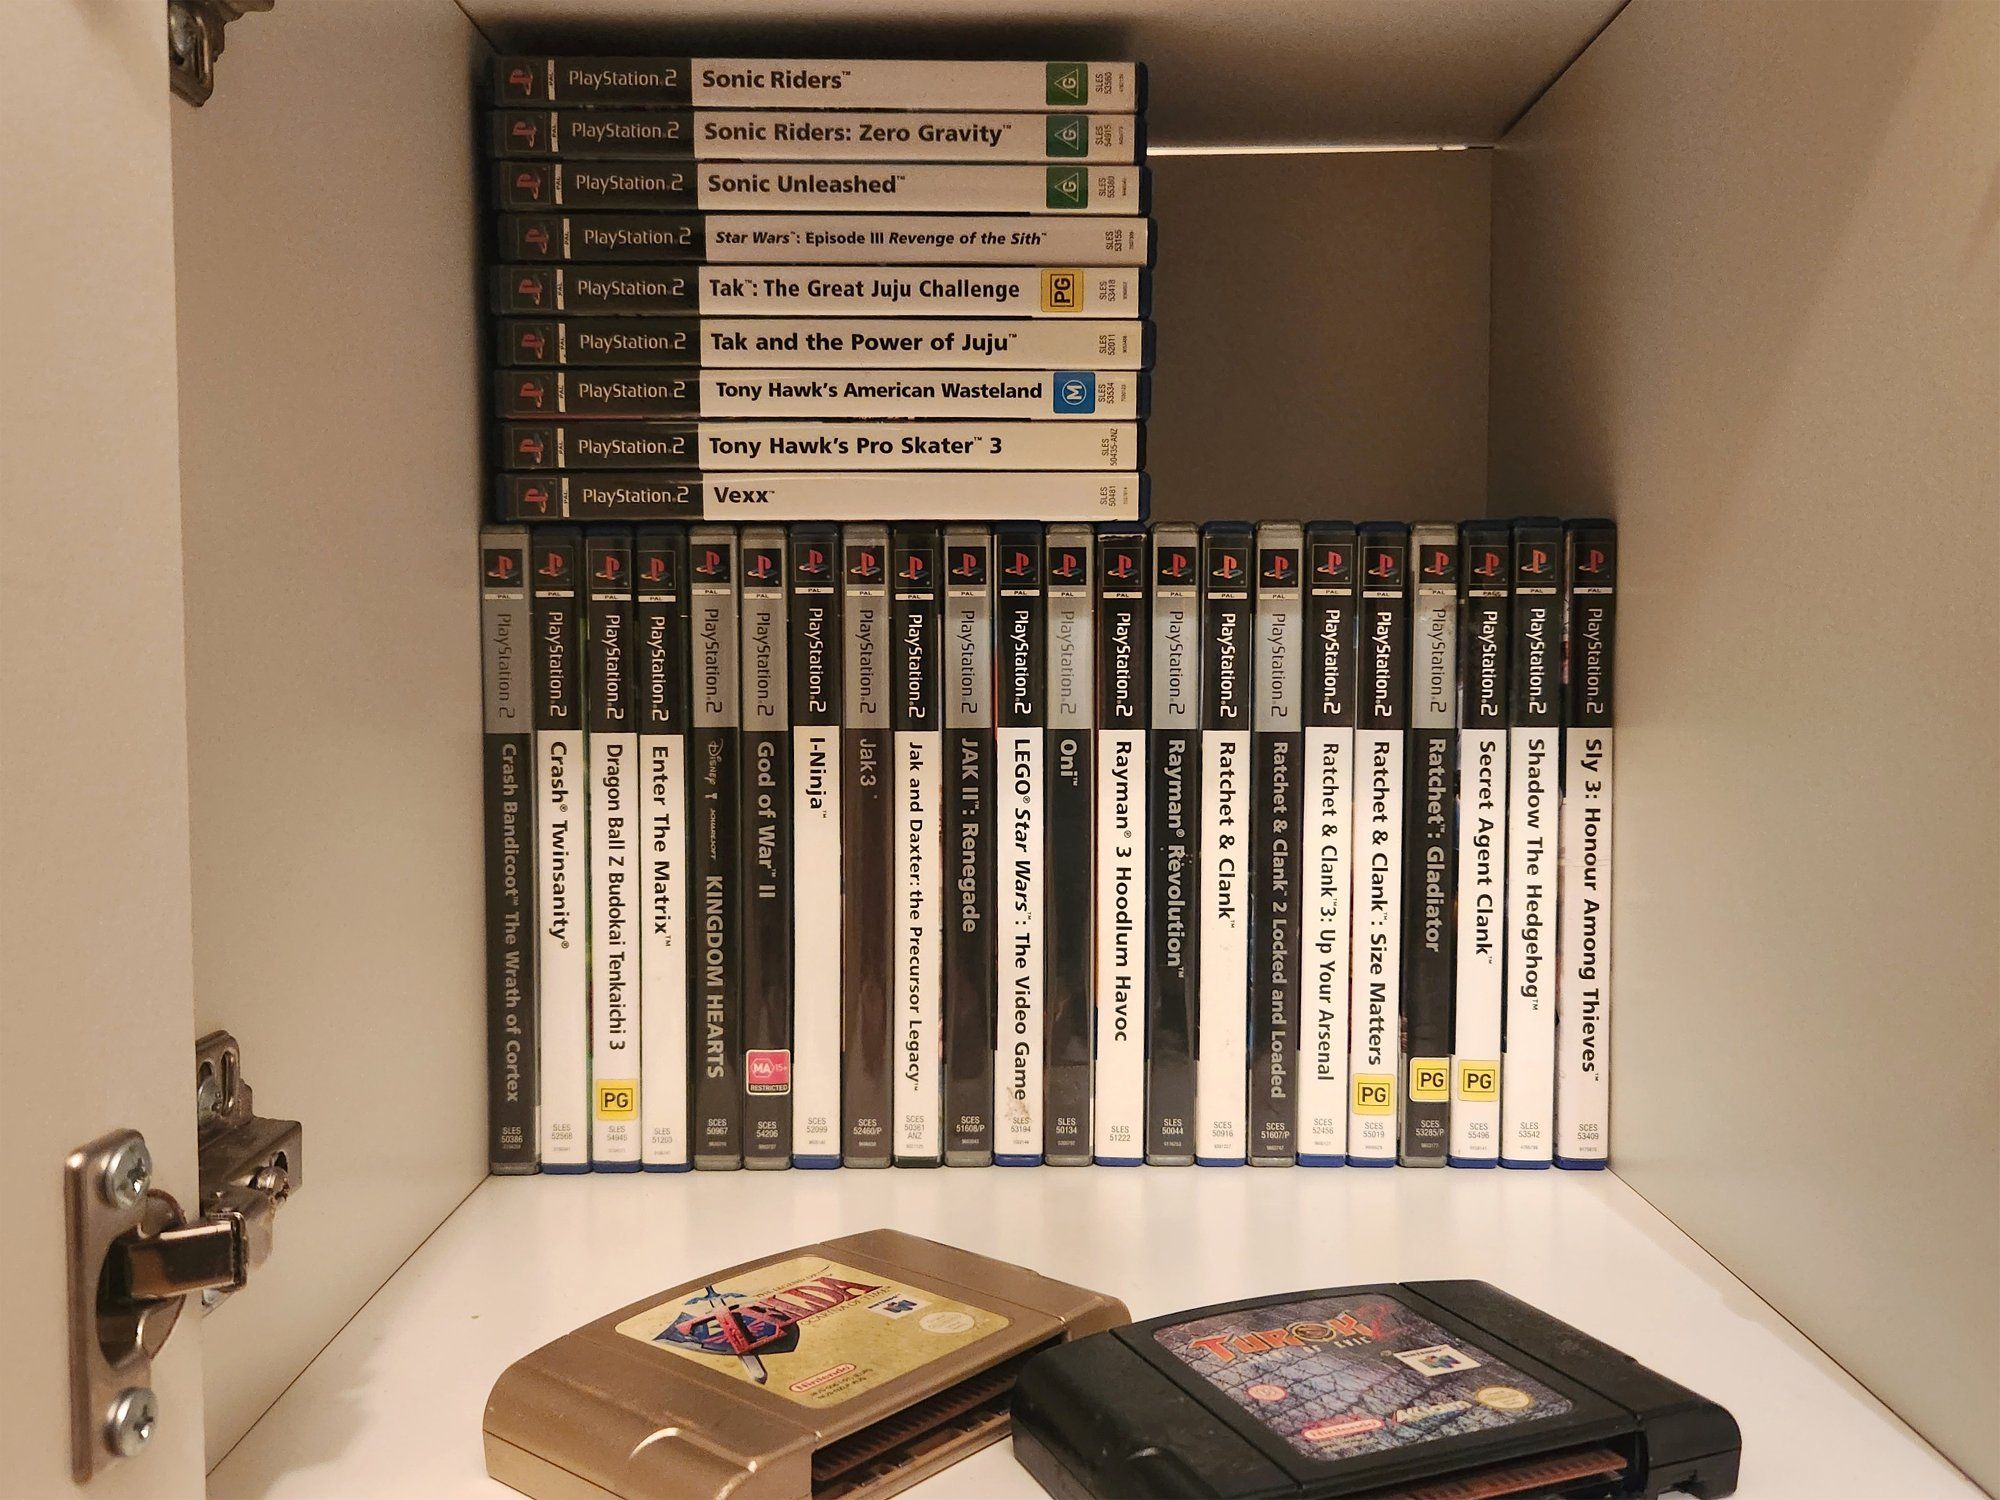 A PS2 video games collection